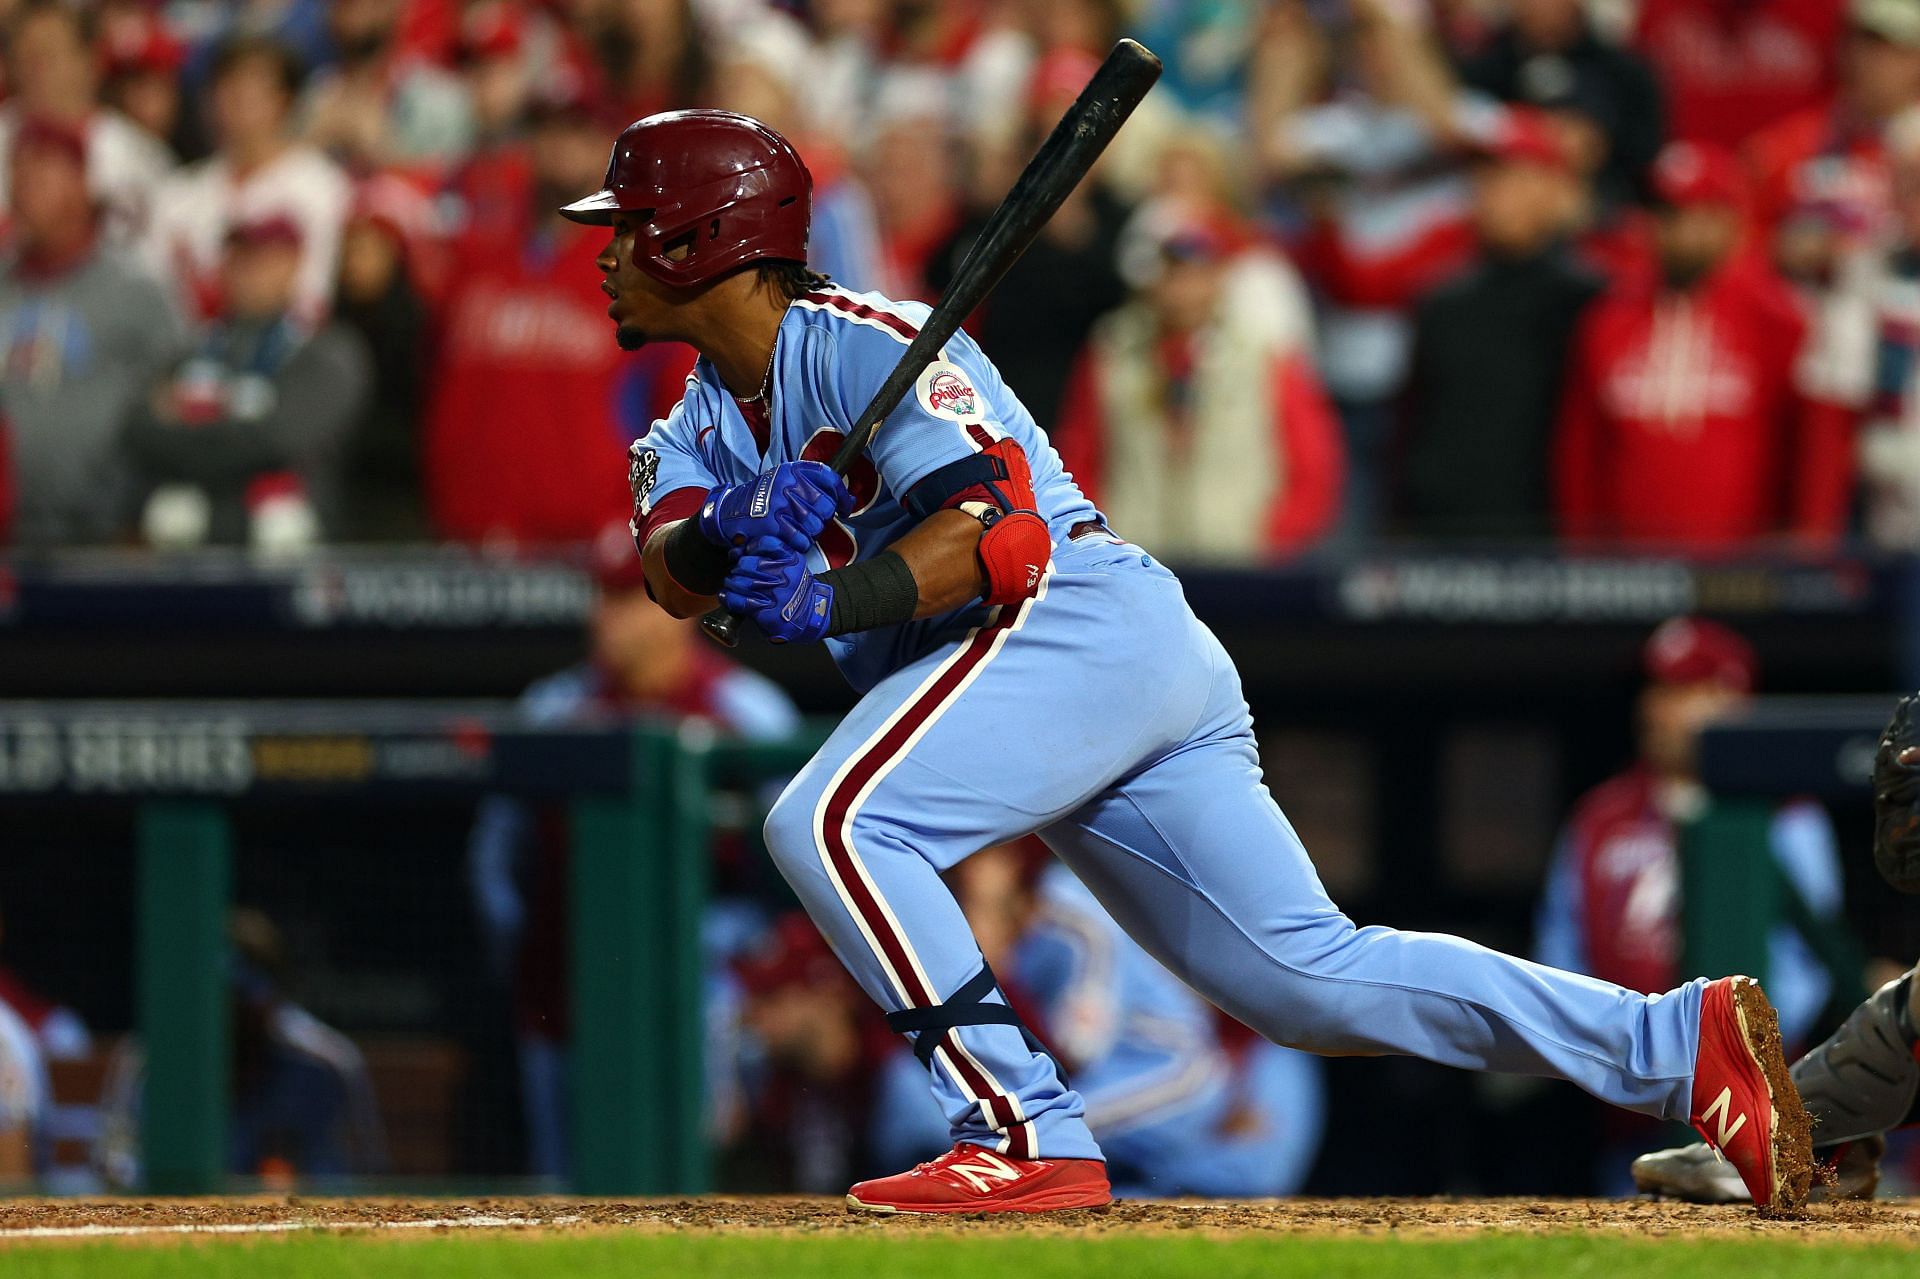 As MLB rules shift, star shortstops hit free agency. Enticing